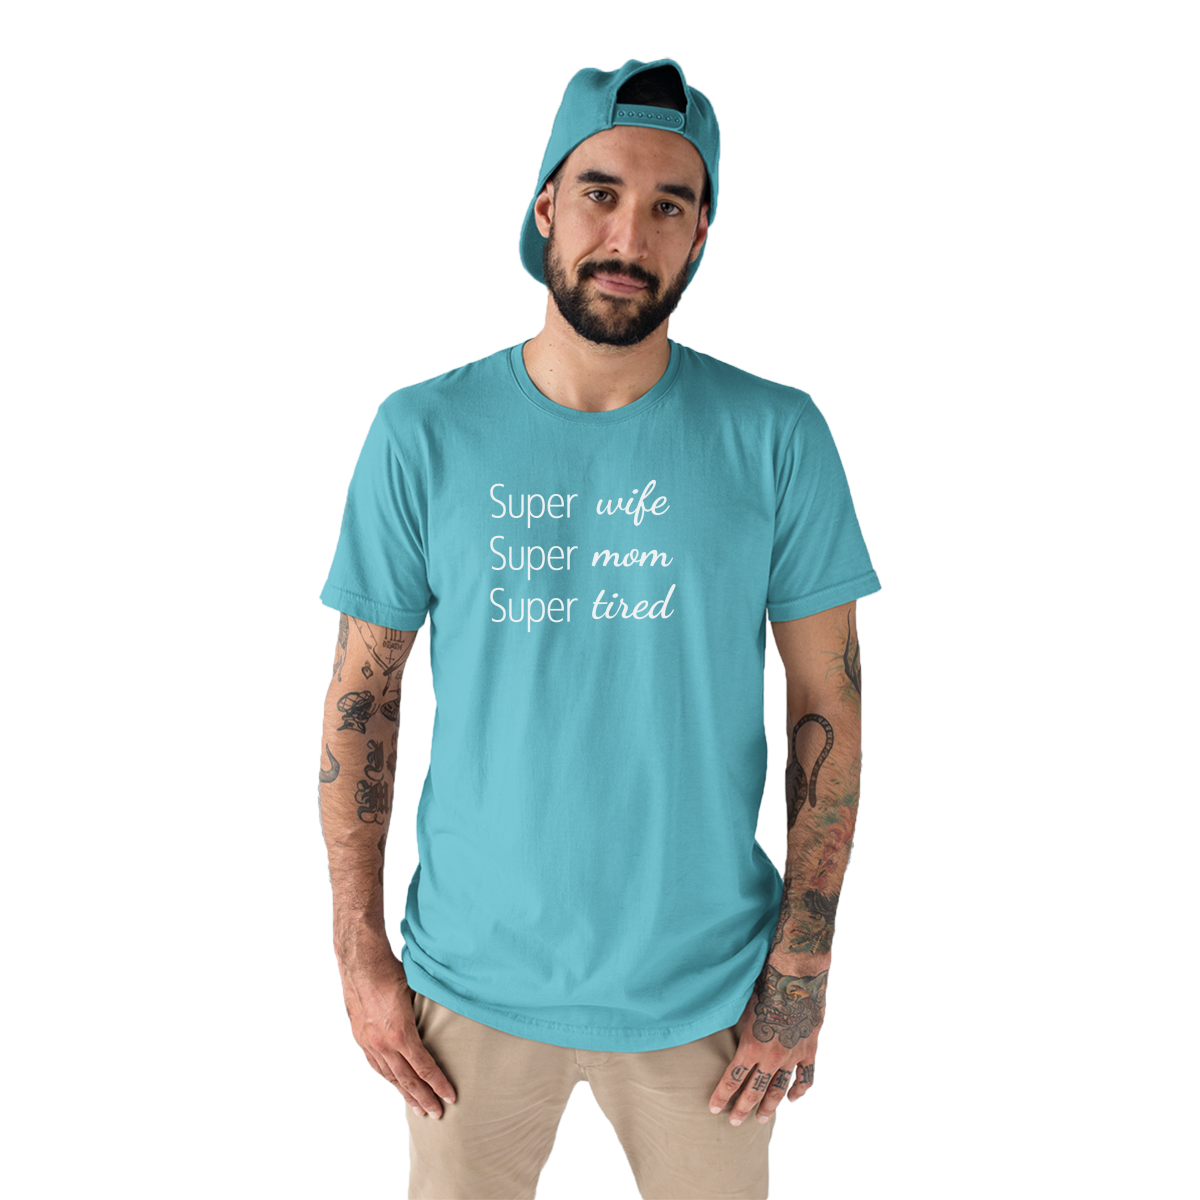 Super Mom Super Wife Super Tired Men's T-shirt | Turquoise